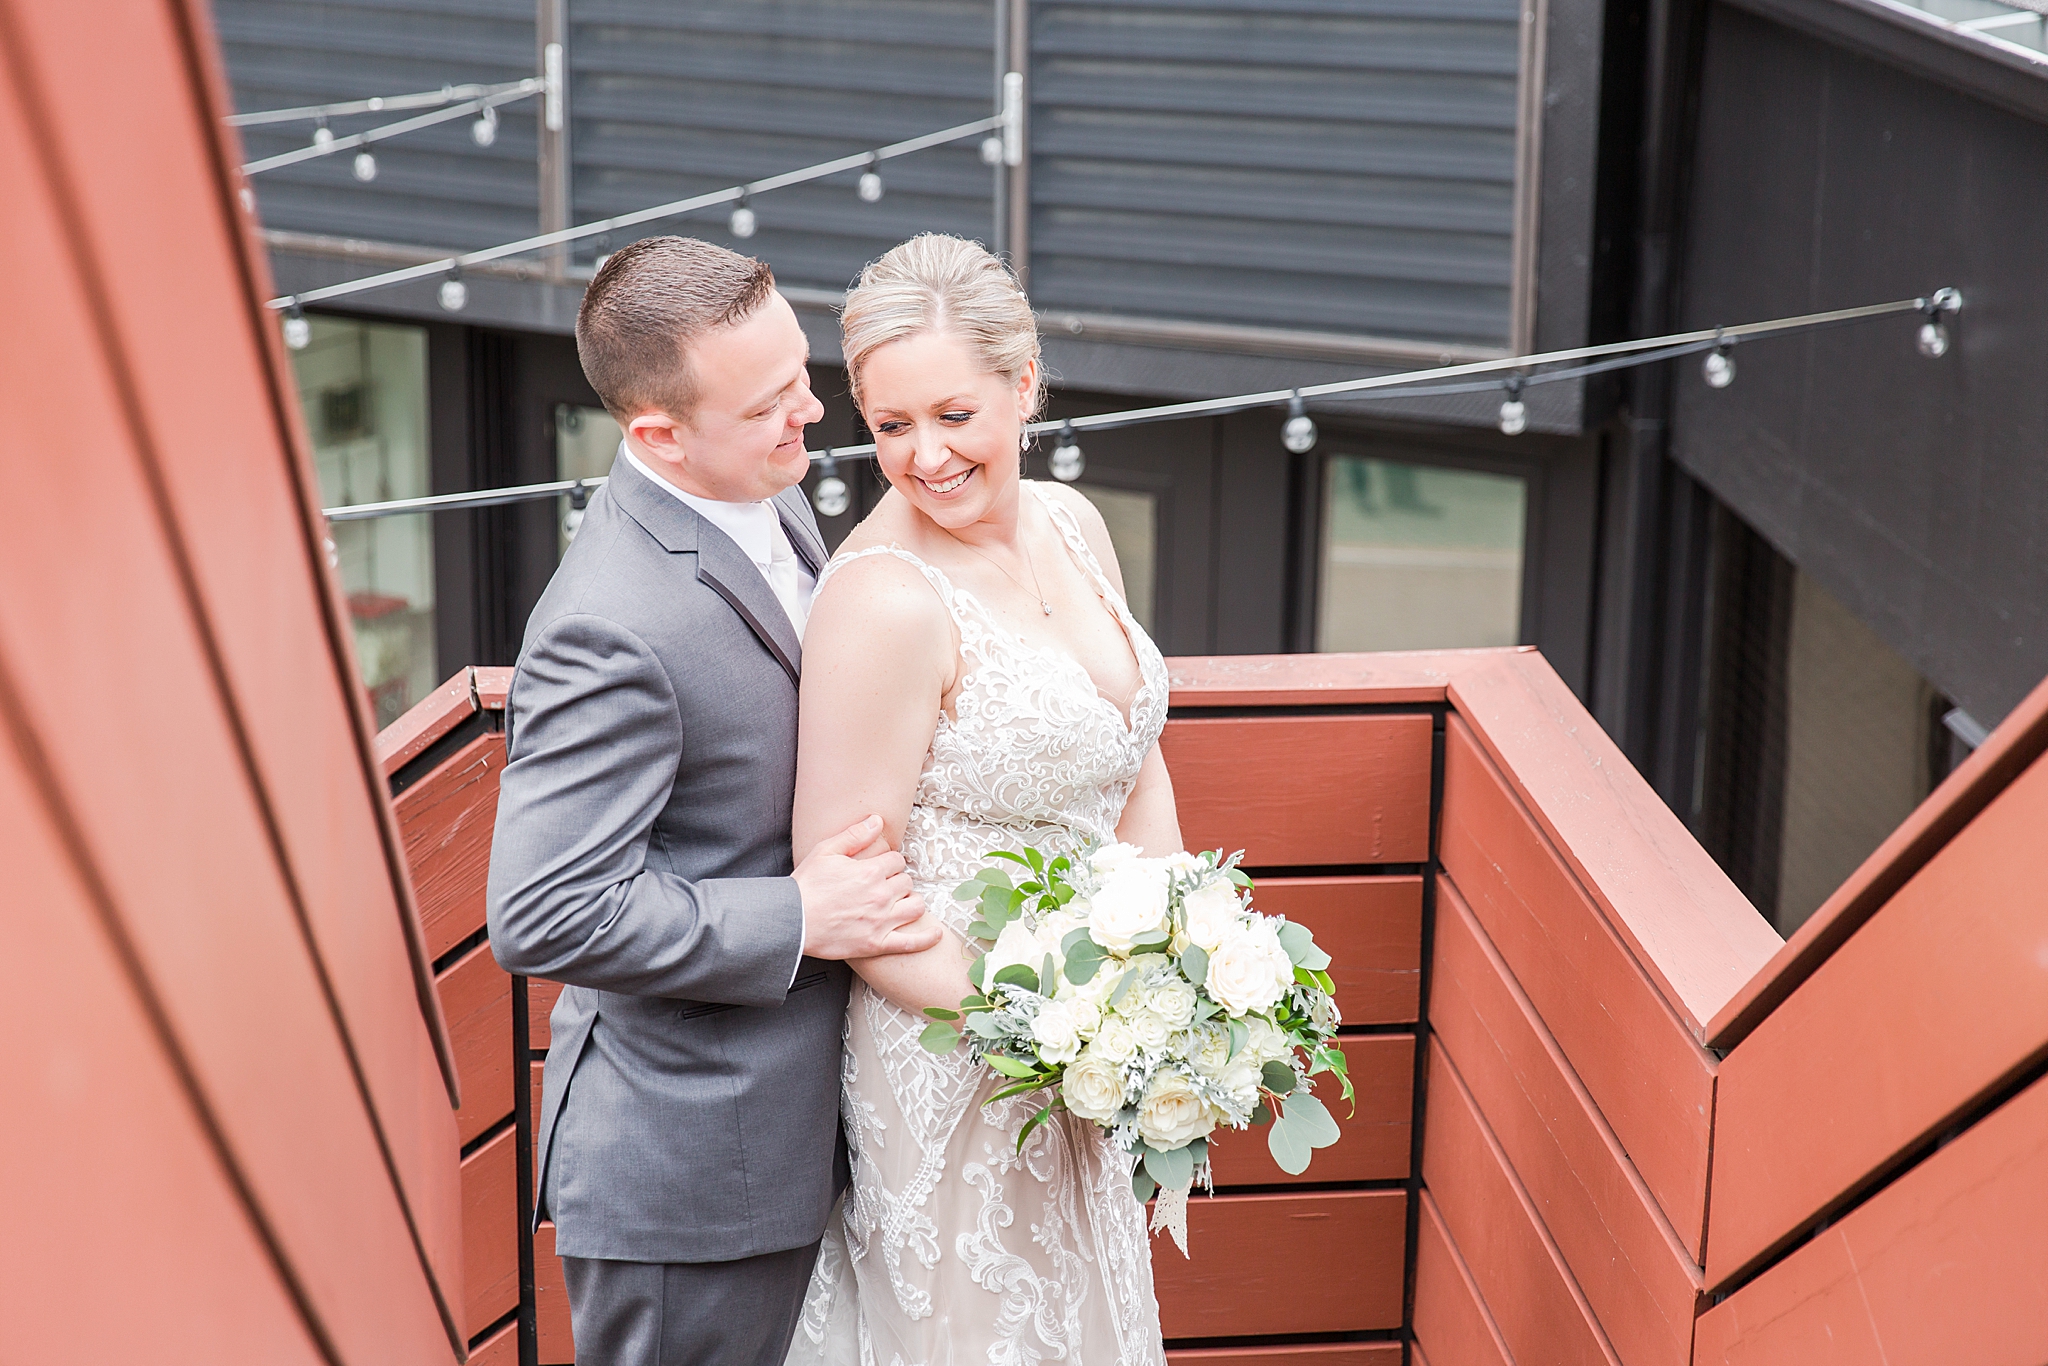 modern-romantic-wedding-photography-at-webers-in-ann-arbor-michigan-by-courtney-carolyn-photography_0030.jpg